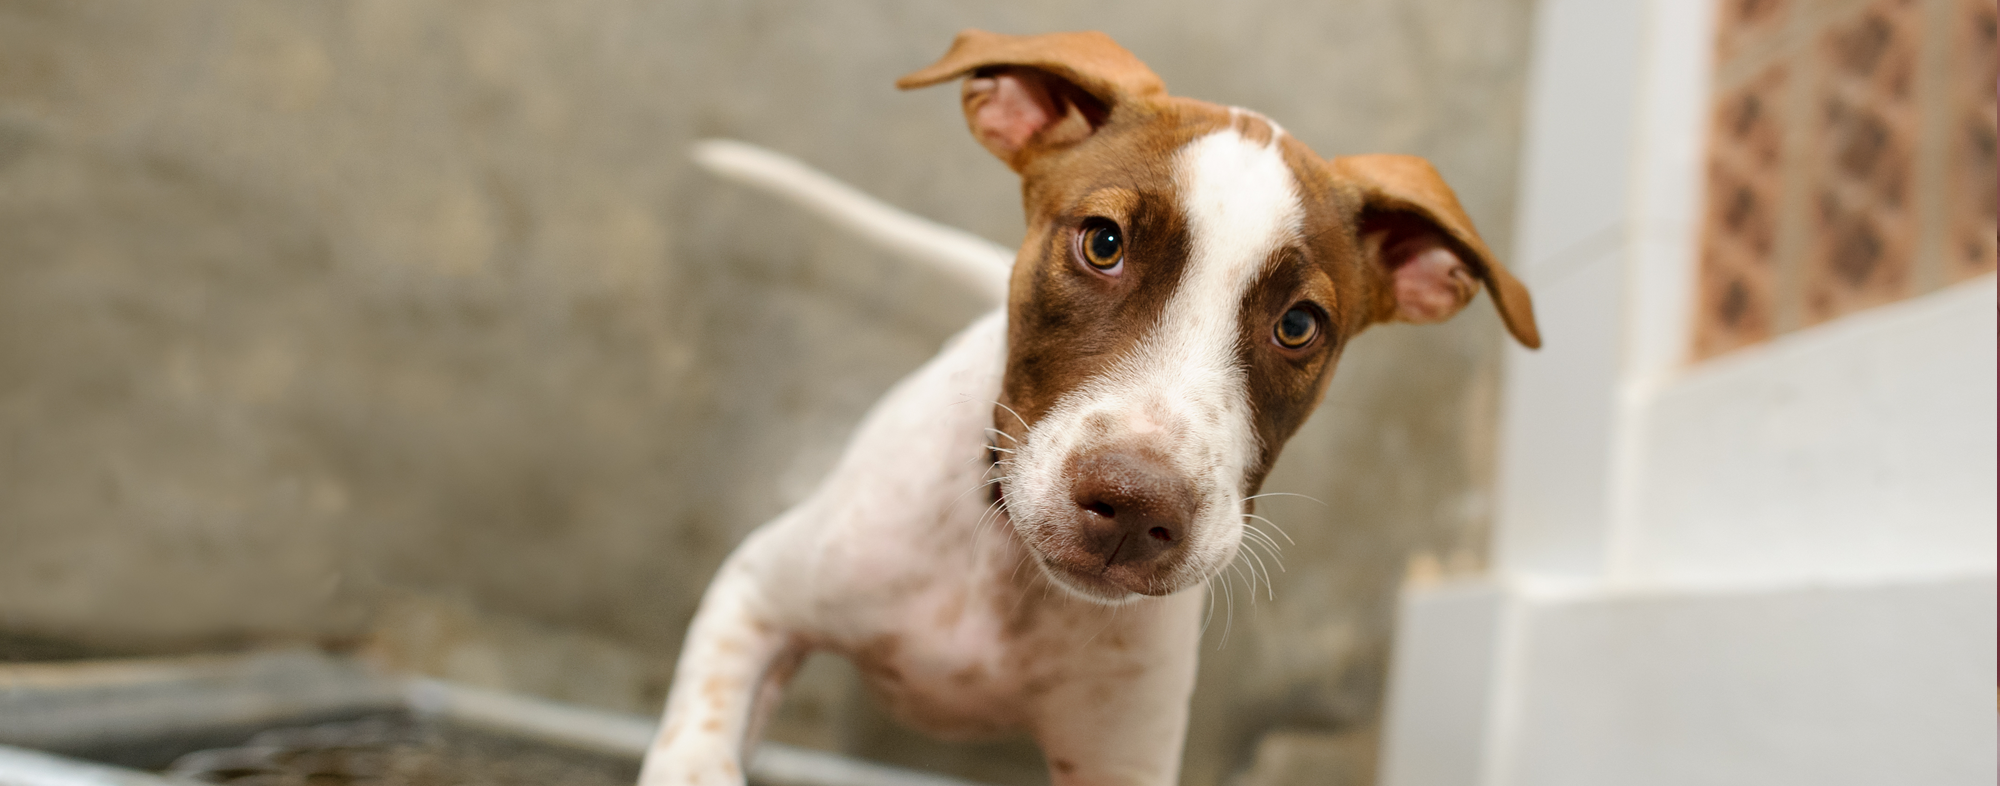 At your local shelter, a rescue dog could be waiting for you